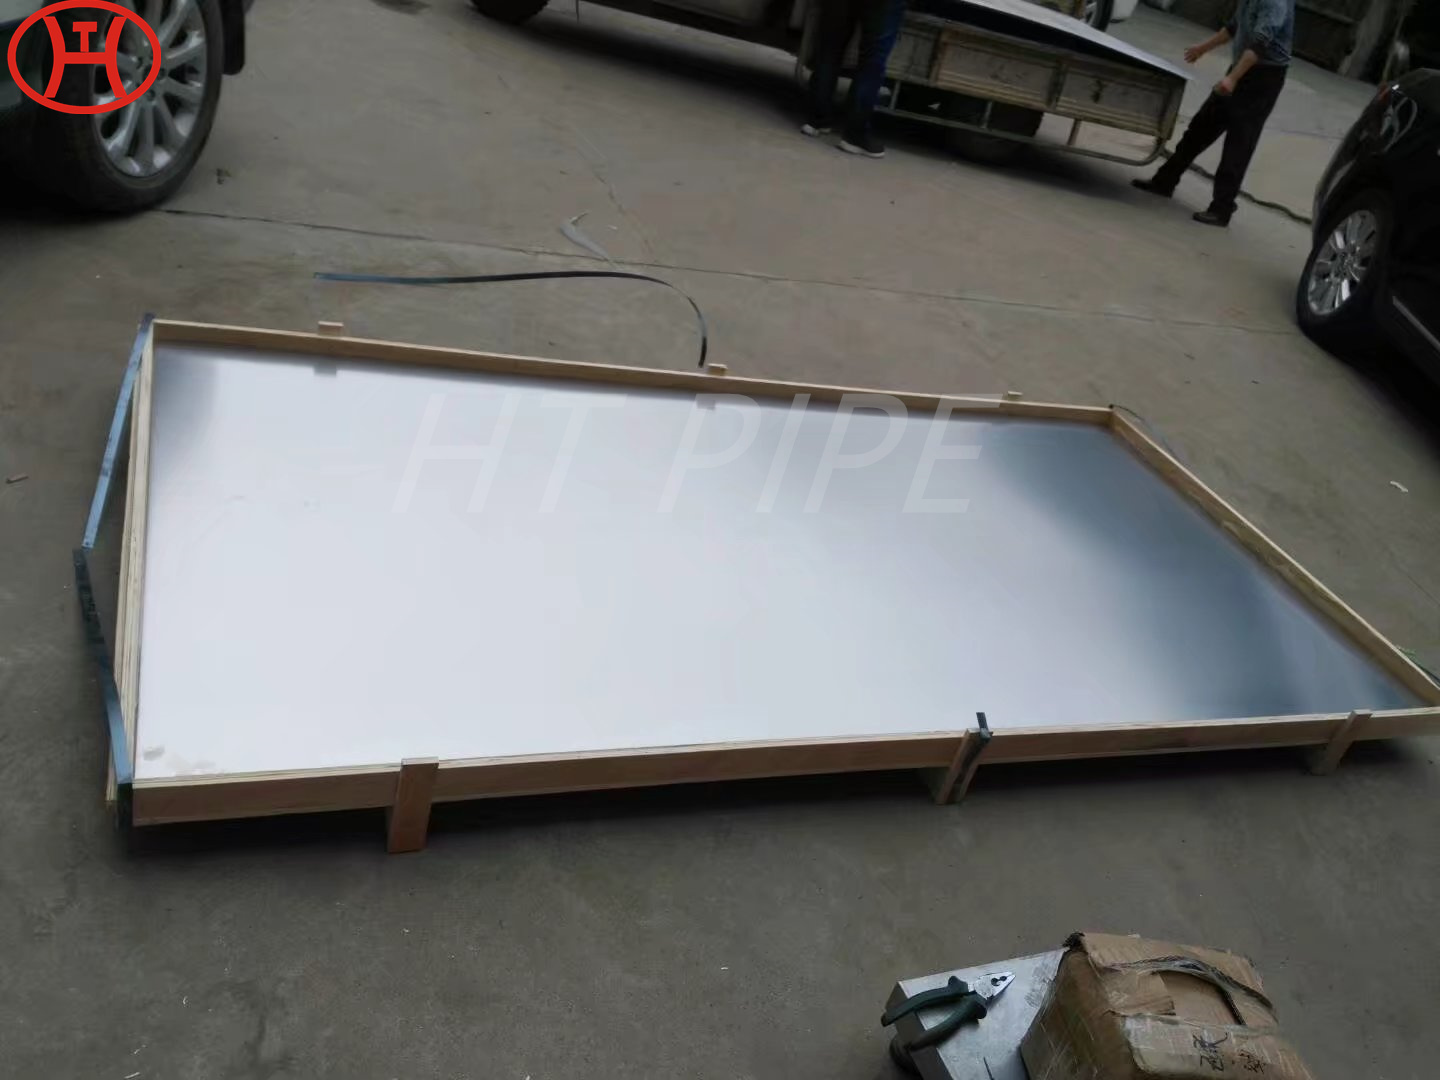 Astm A240 F55 S32760 1.4501 5 Plate Stainless Steel 304 3Mm Taiwan Aisi Ss Sheet Price 3X1